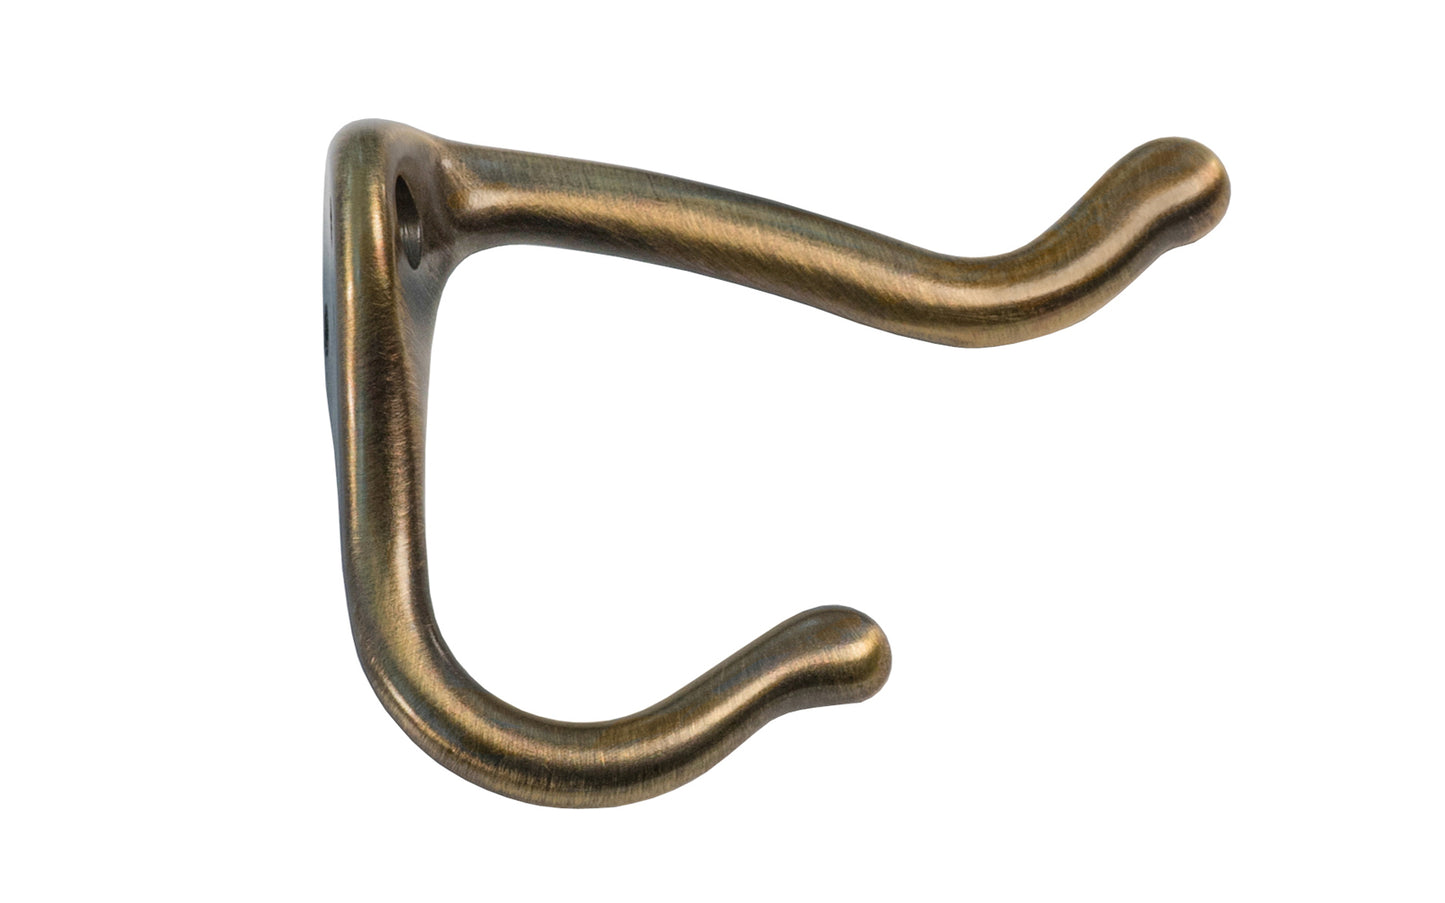 Ives Solid Brass Double Hook. Solid Brass Coat & Hat Hook ~ Antique Brass Finish. Great for kitchens, bathrooms, hallways, furniture, cabinets, bedrooms. The two prong hook is made of solid brass material, making it durable for clothing, towels, bags. Hat & Coat Hook. 3" projection. 571-B5.